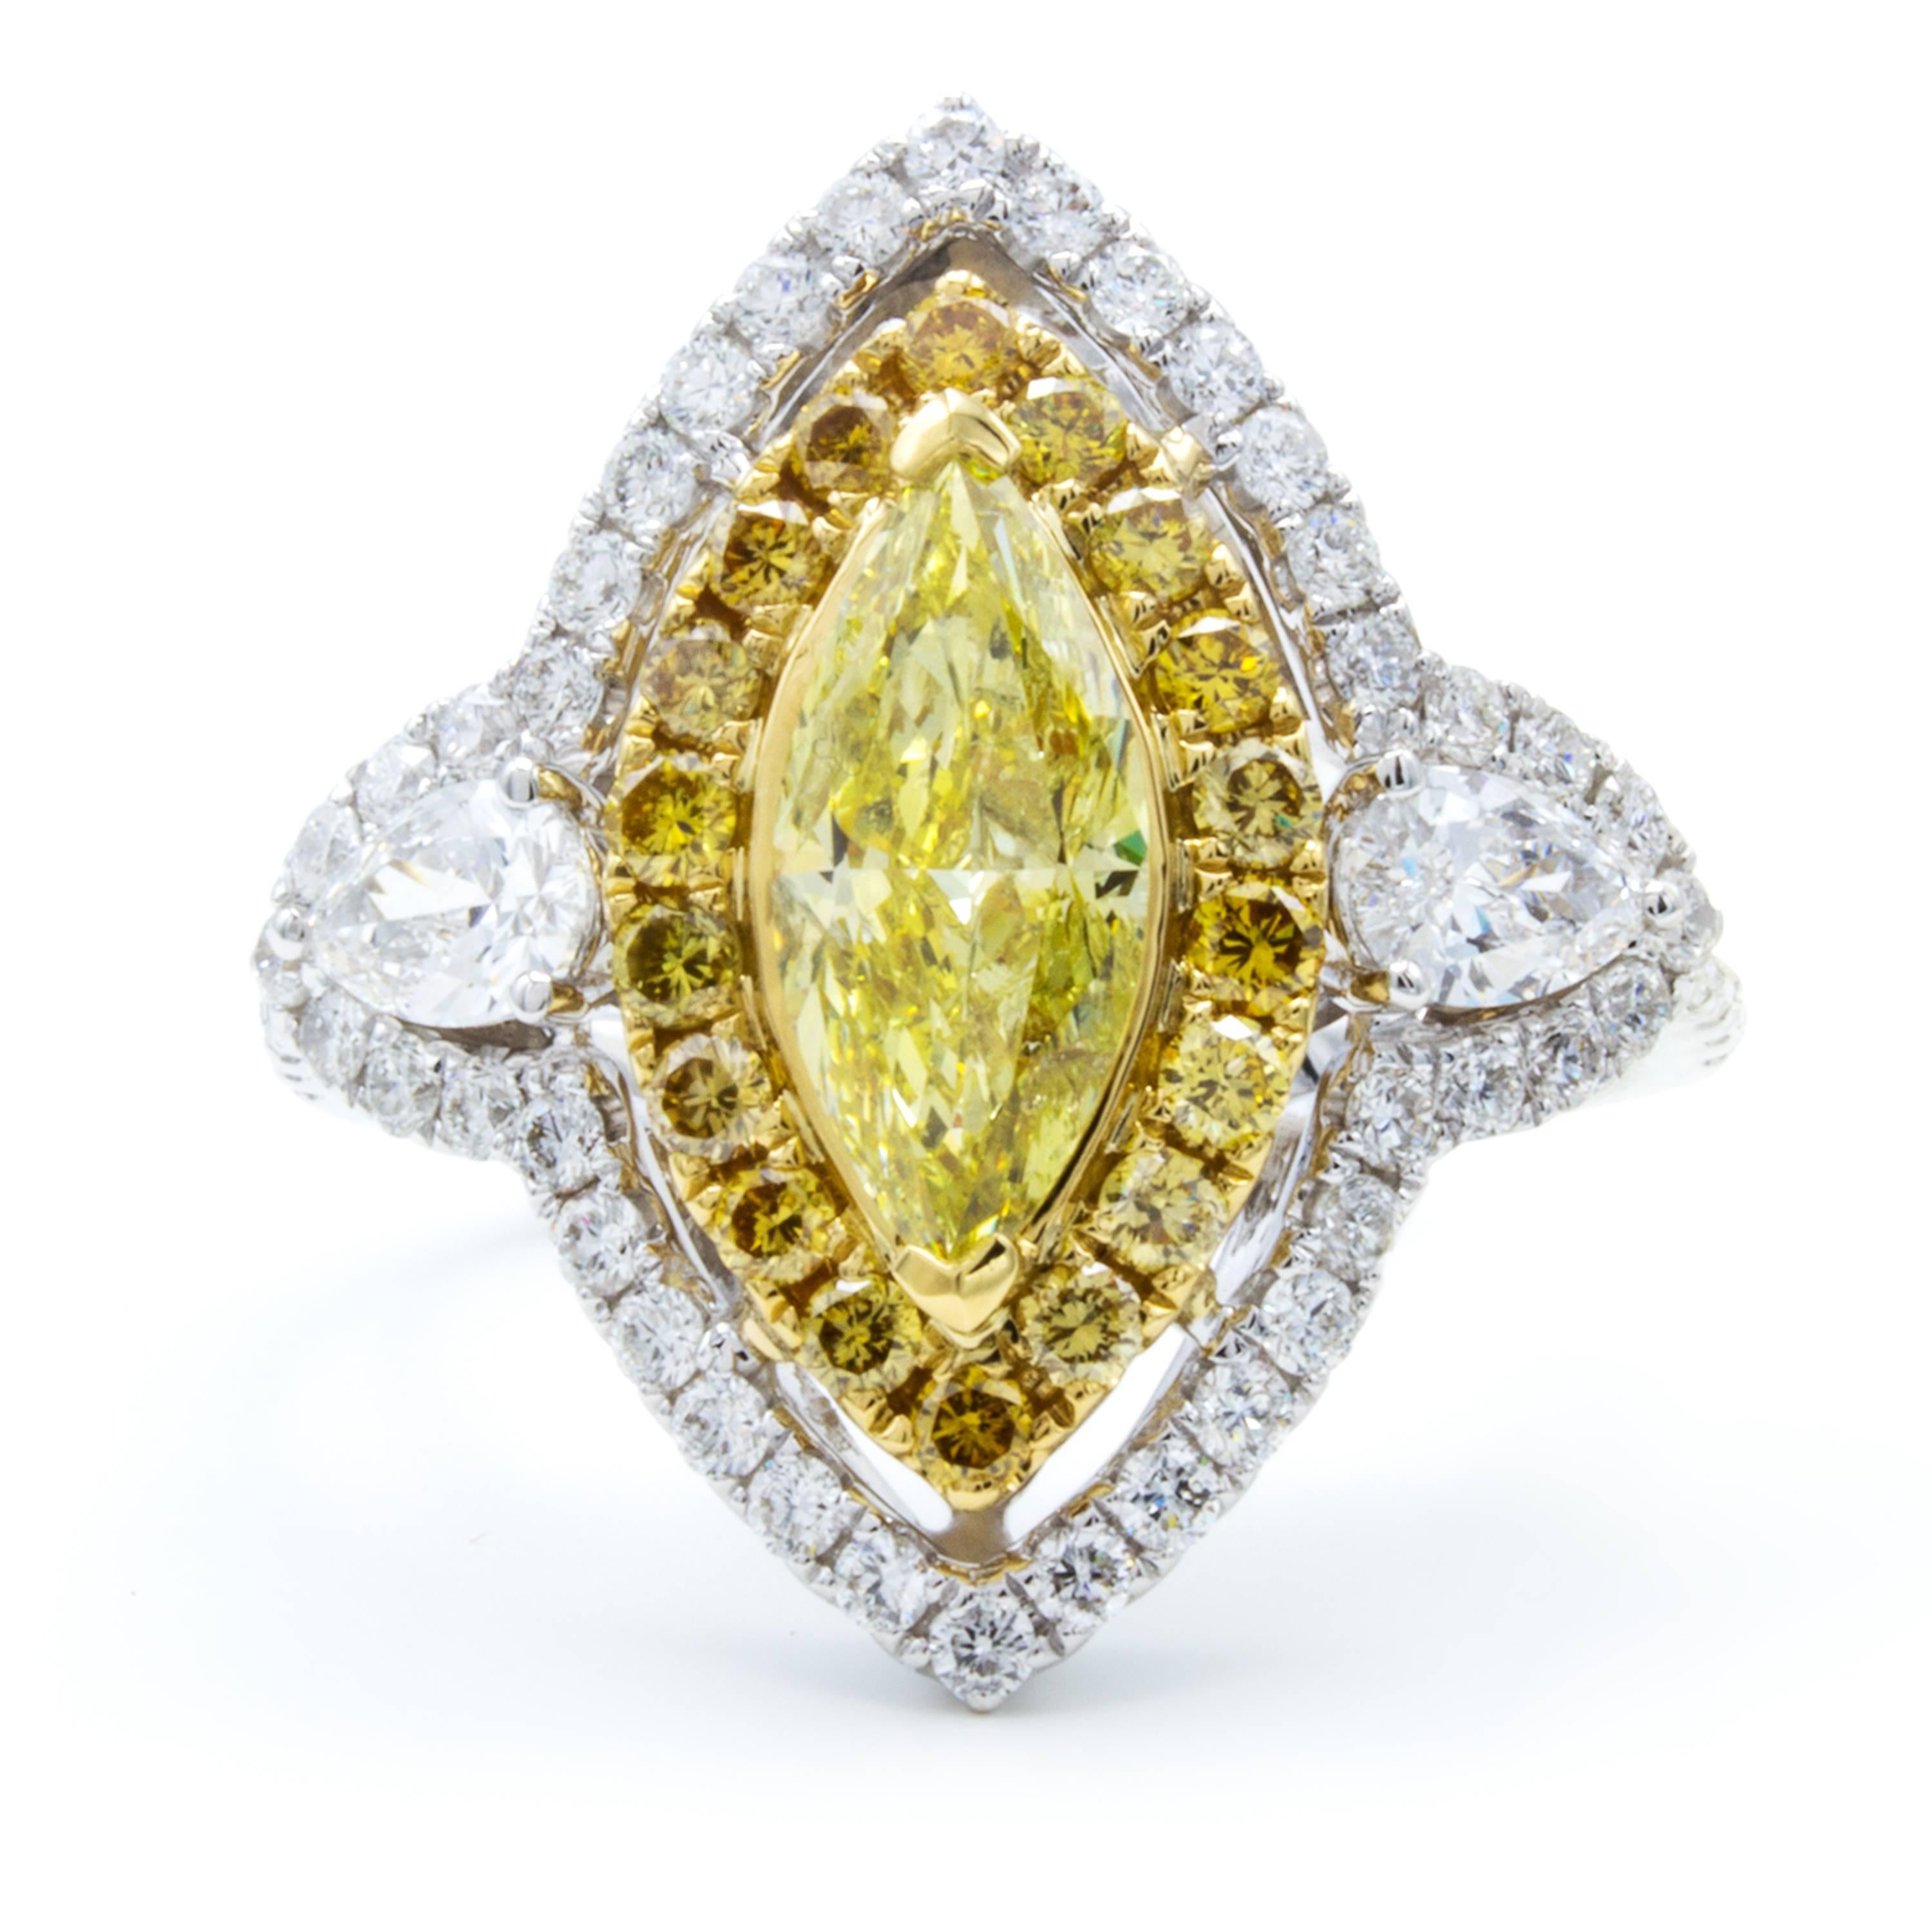 The rare and elegant marquise cut is celebrated in this Rosenberg Diamonds & Co. engagement ring featuring a GIA certified .93 carat marquise diamond. The center stone boasts an incredibly rich natural fancy intense yellow color within an elegant